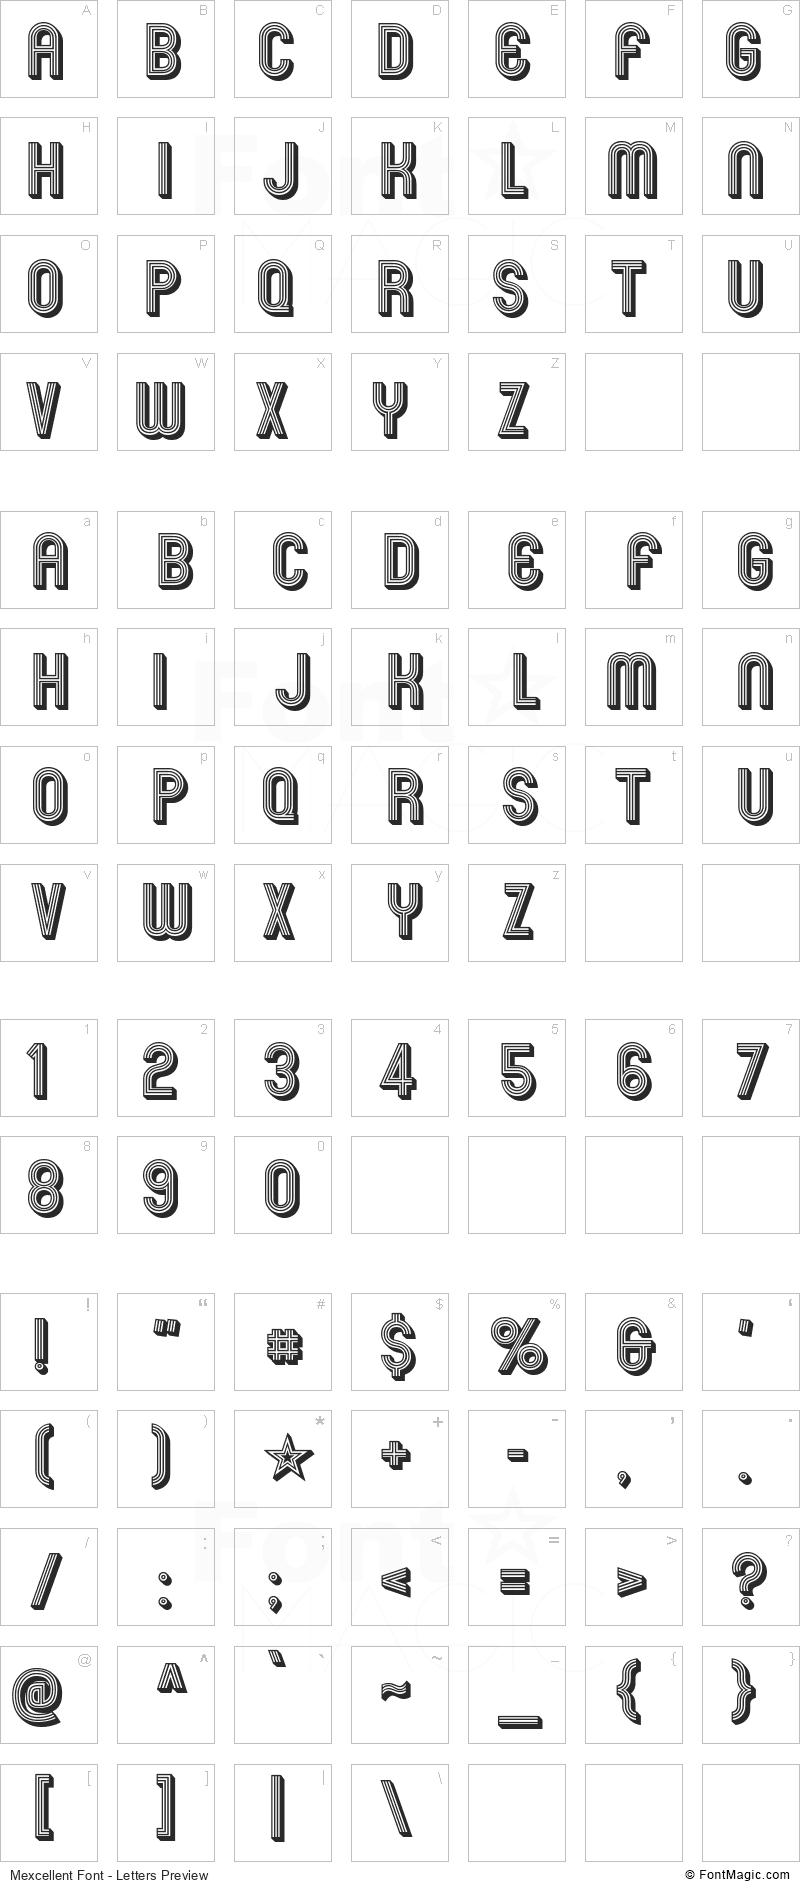 Mexcellent Font - All Latters Preview Chart